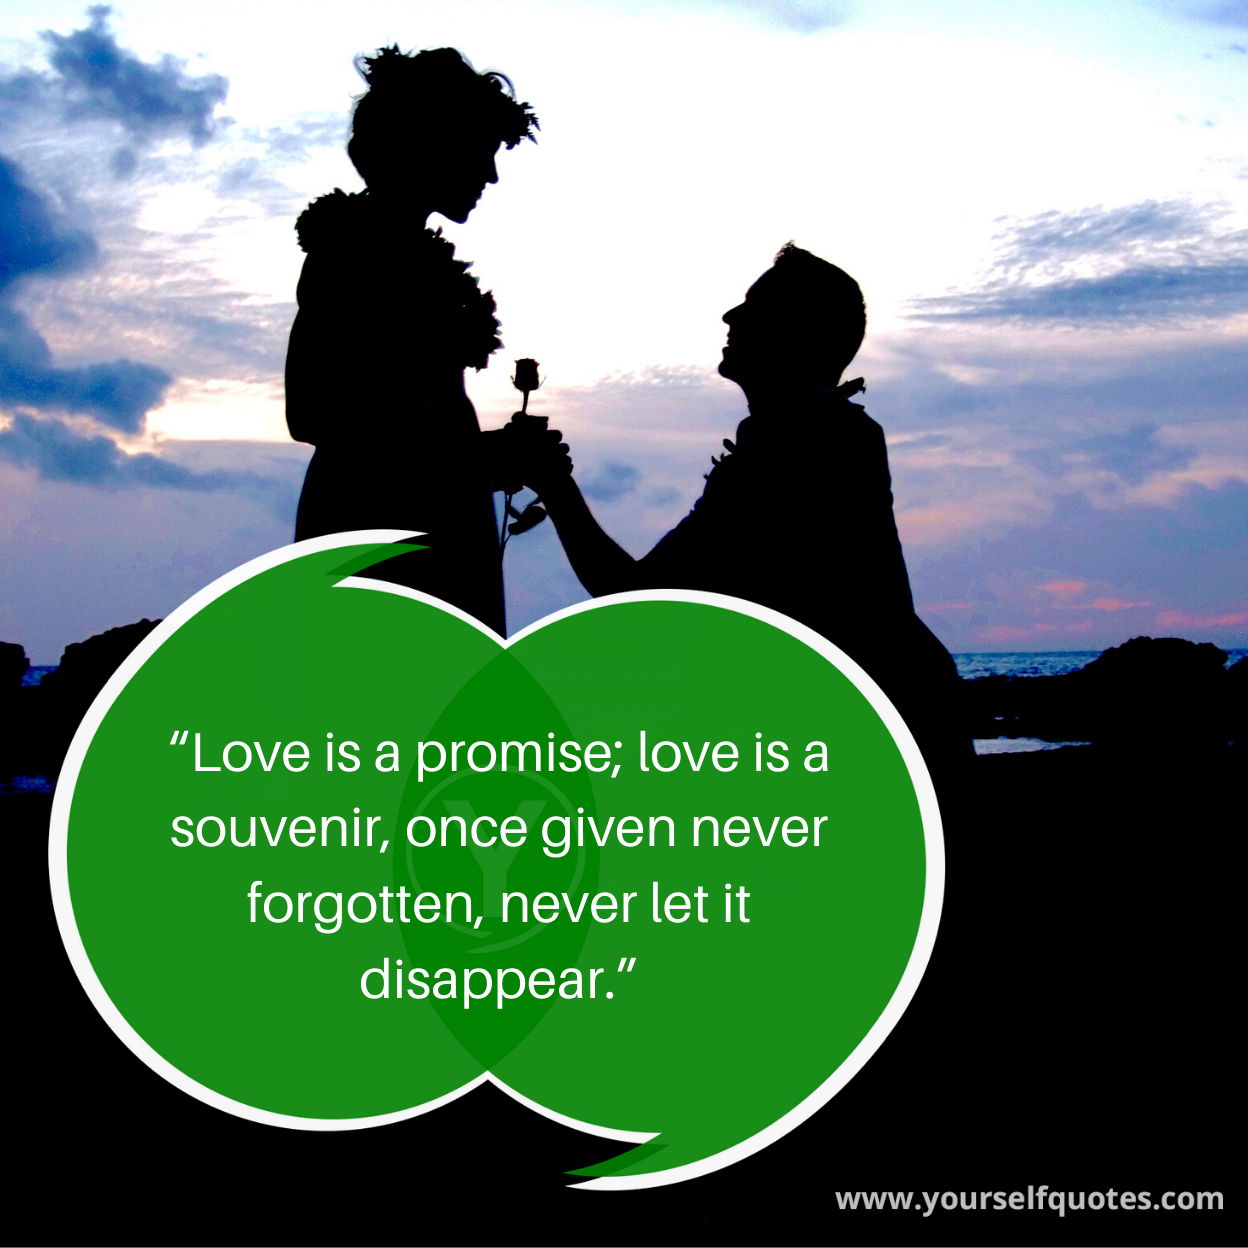 Quotes on Love Images